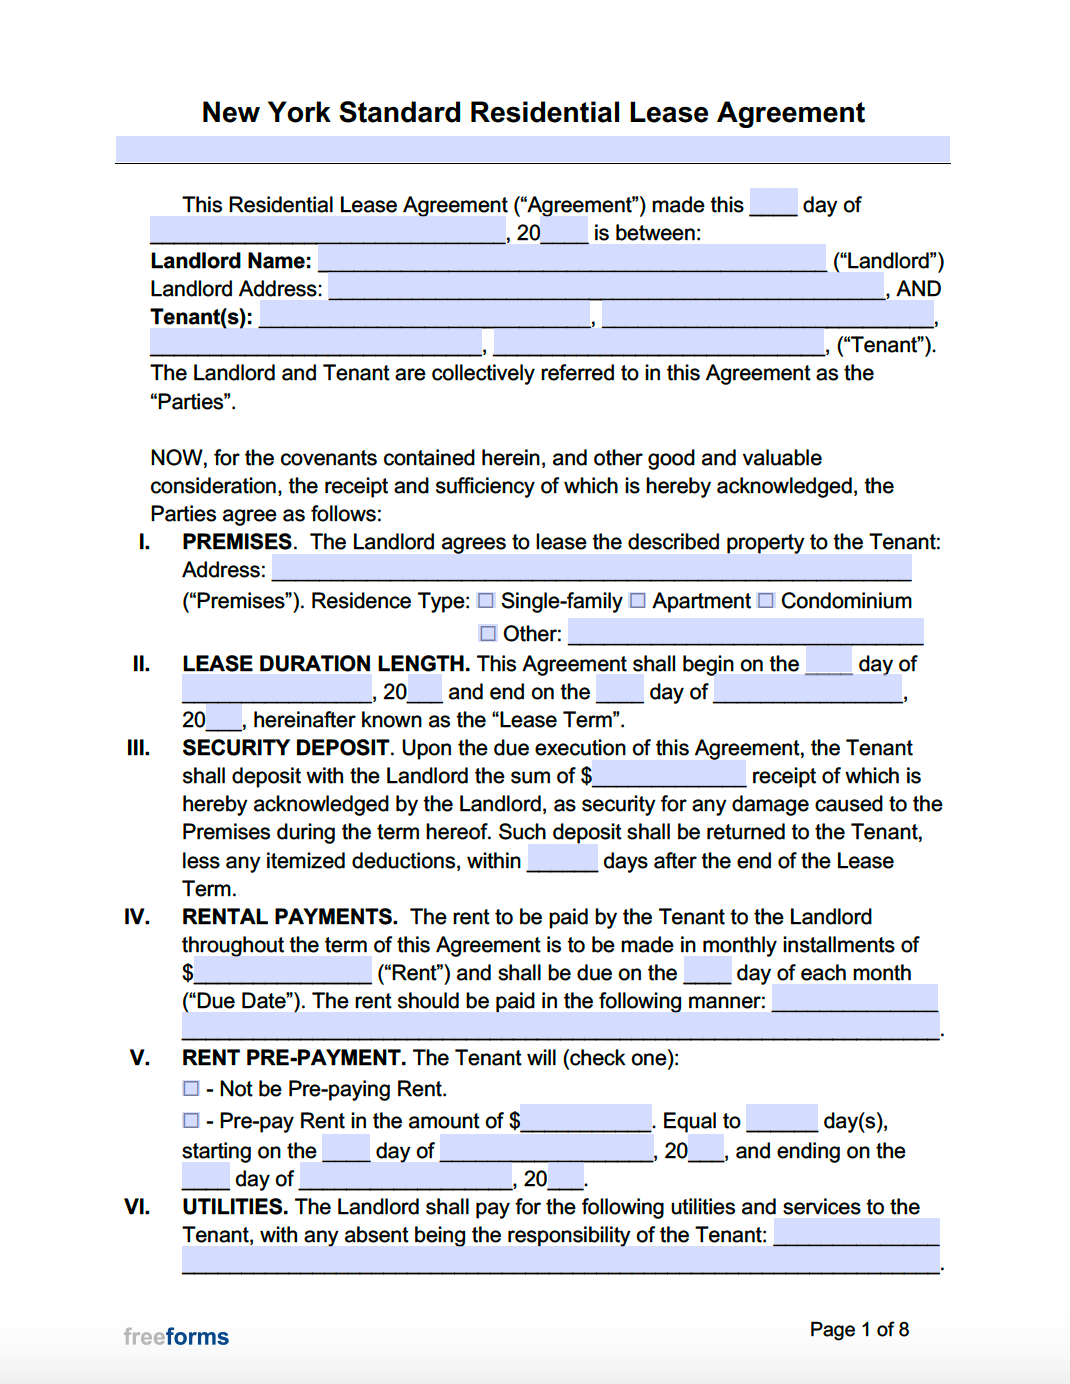 printable-rental-agreement-ny-state-lease-form-printable-forms-free